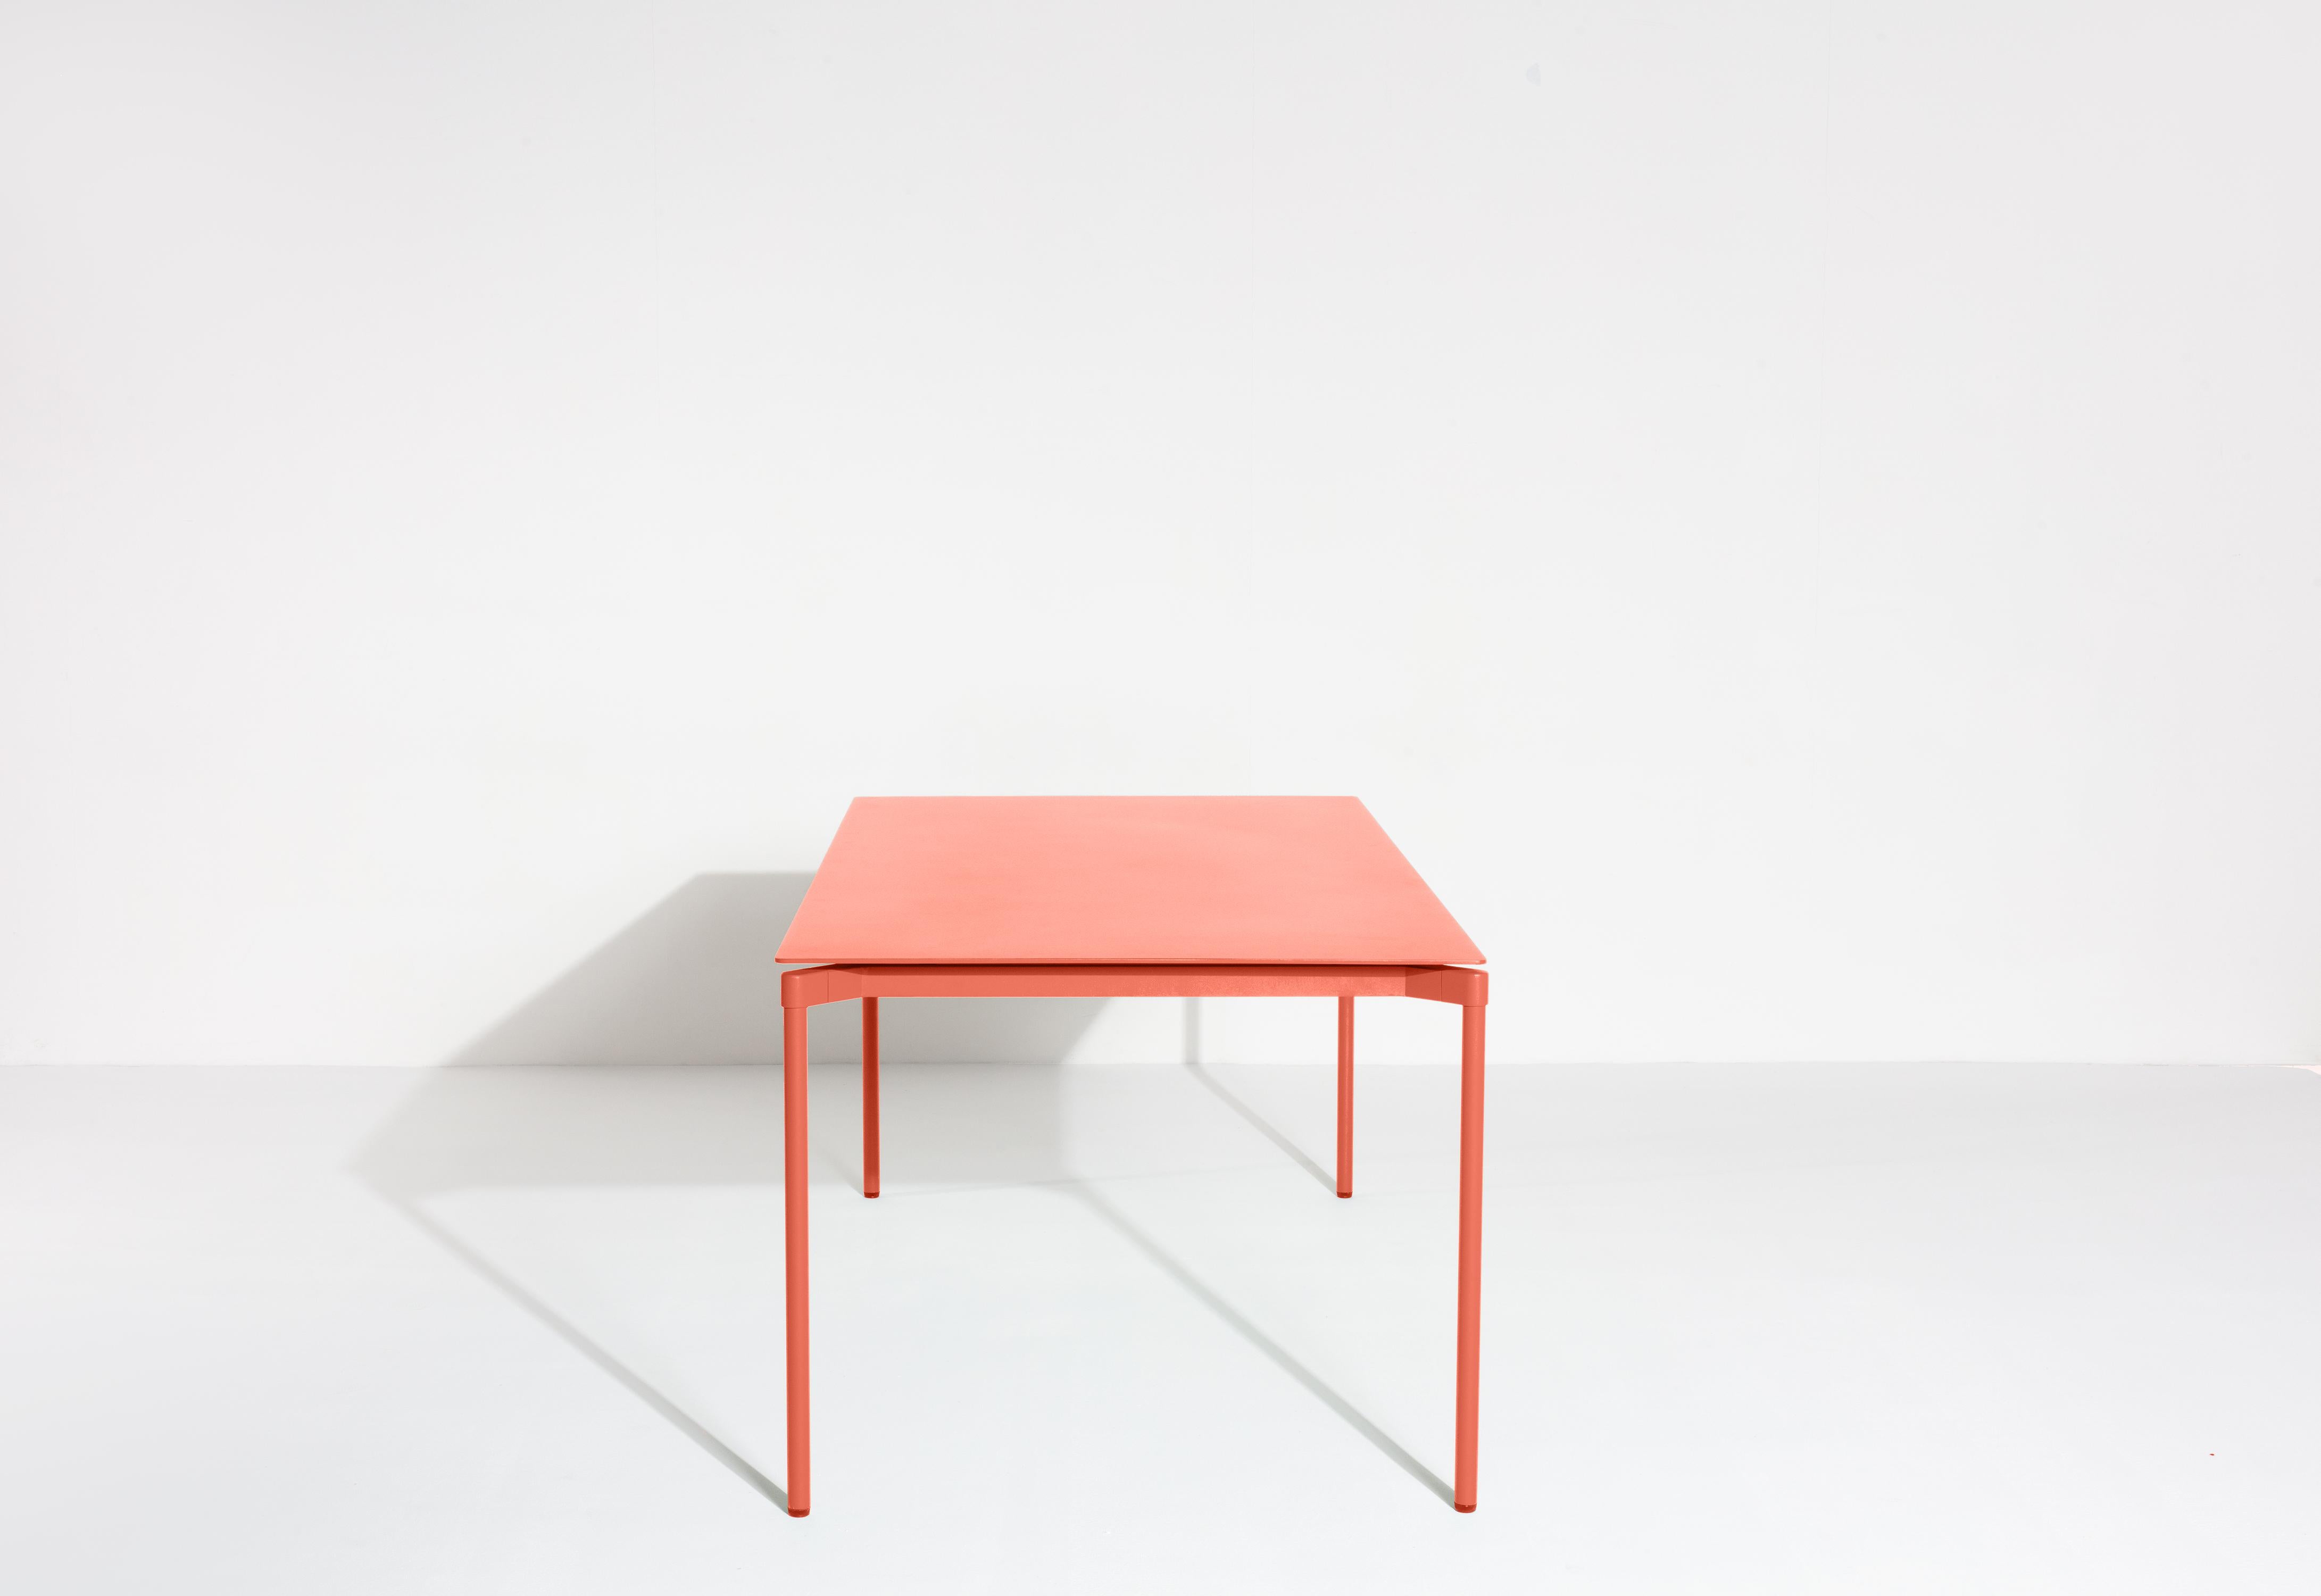 Aluminum Petite Friture Fromme Rectangular Table in Coral Aluminium by Tom Chung For Sale